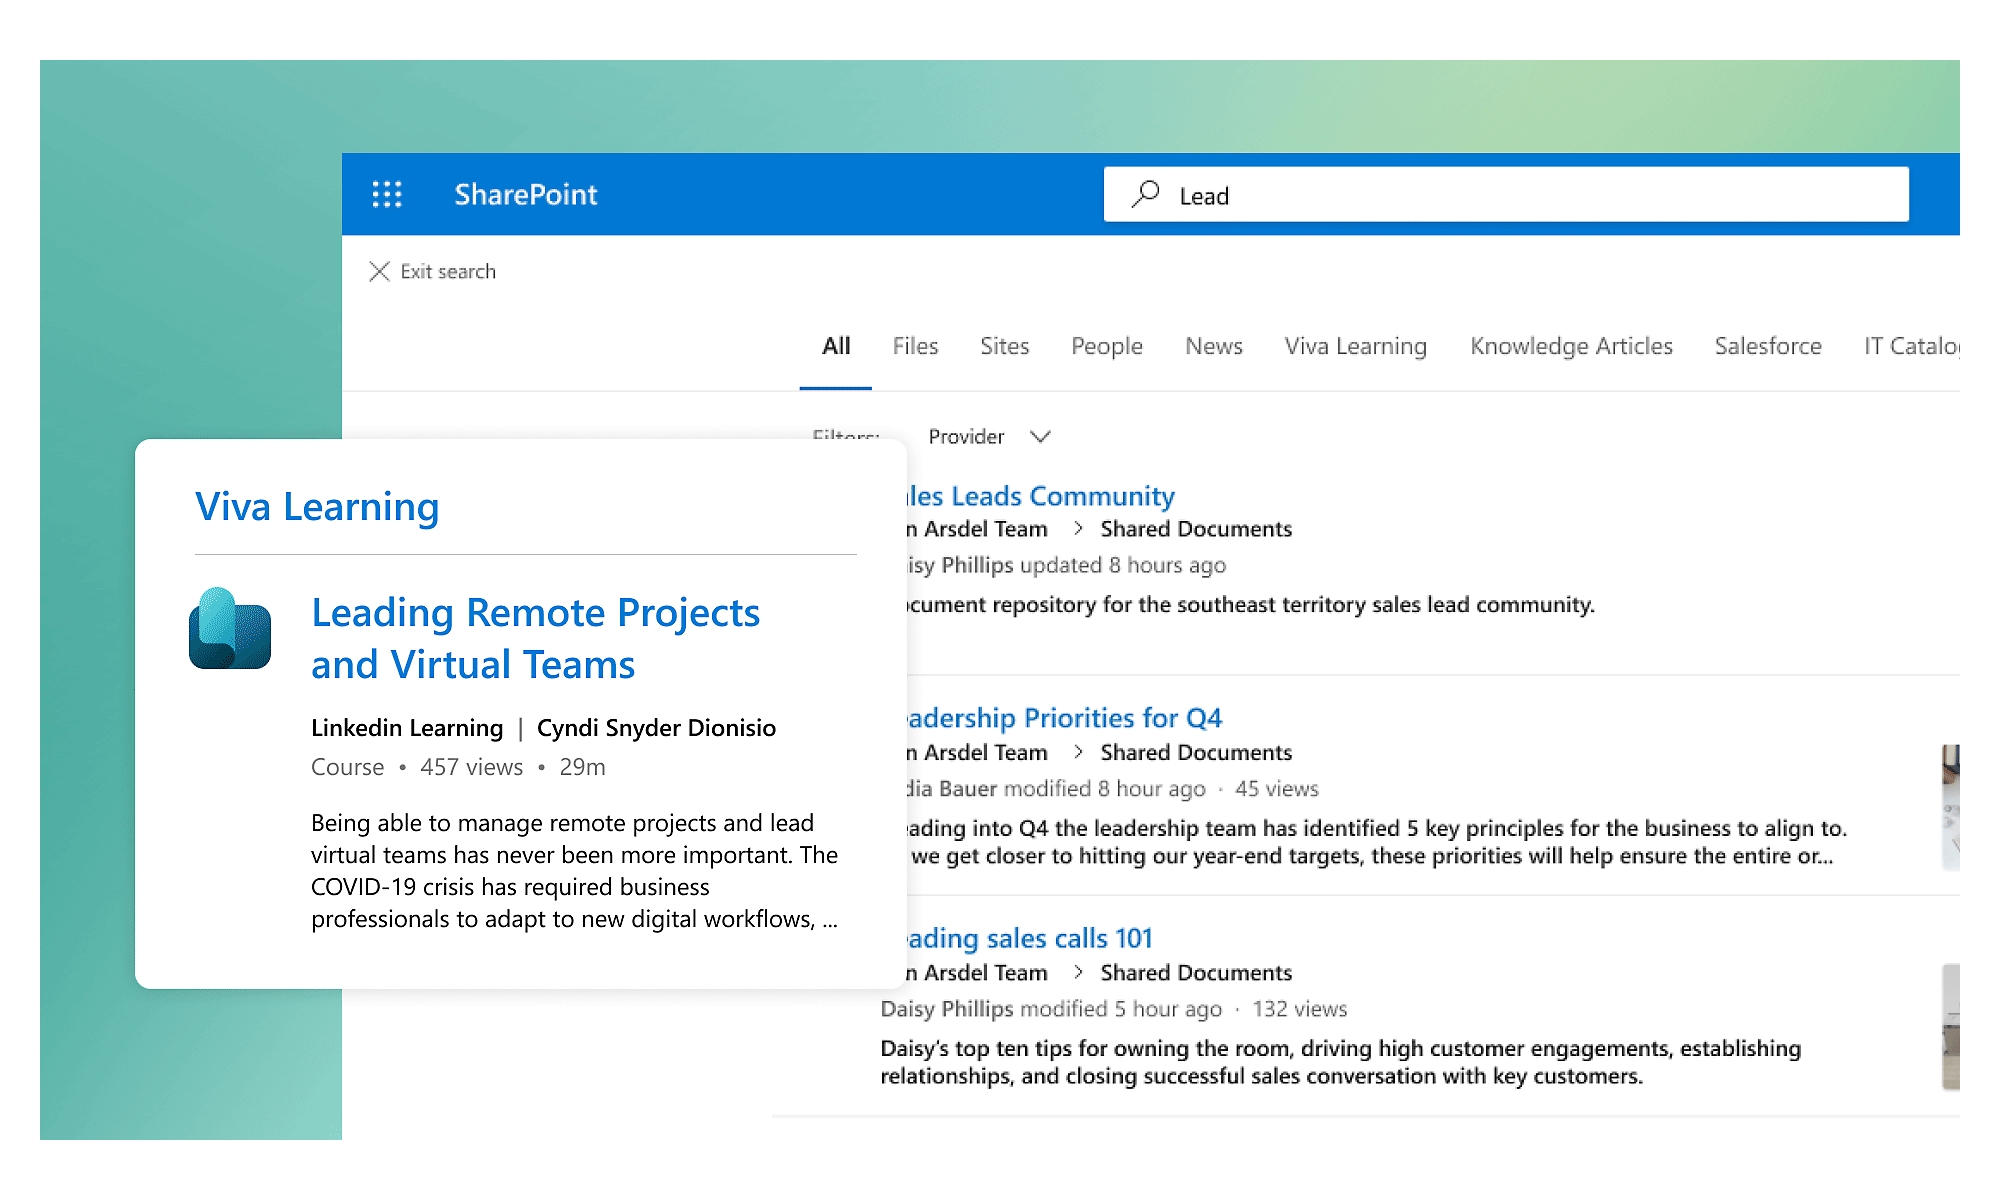 A search in SharePoint for “Lead” showing related content results from Viva Learning.